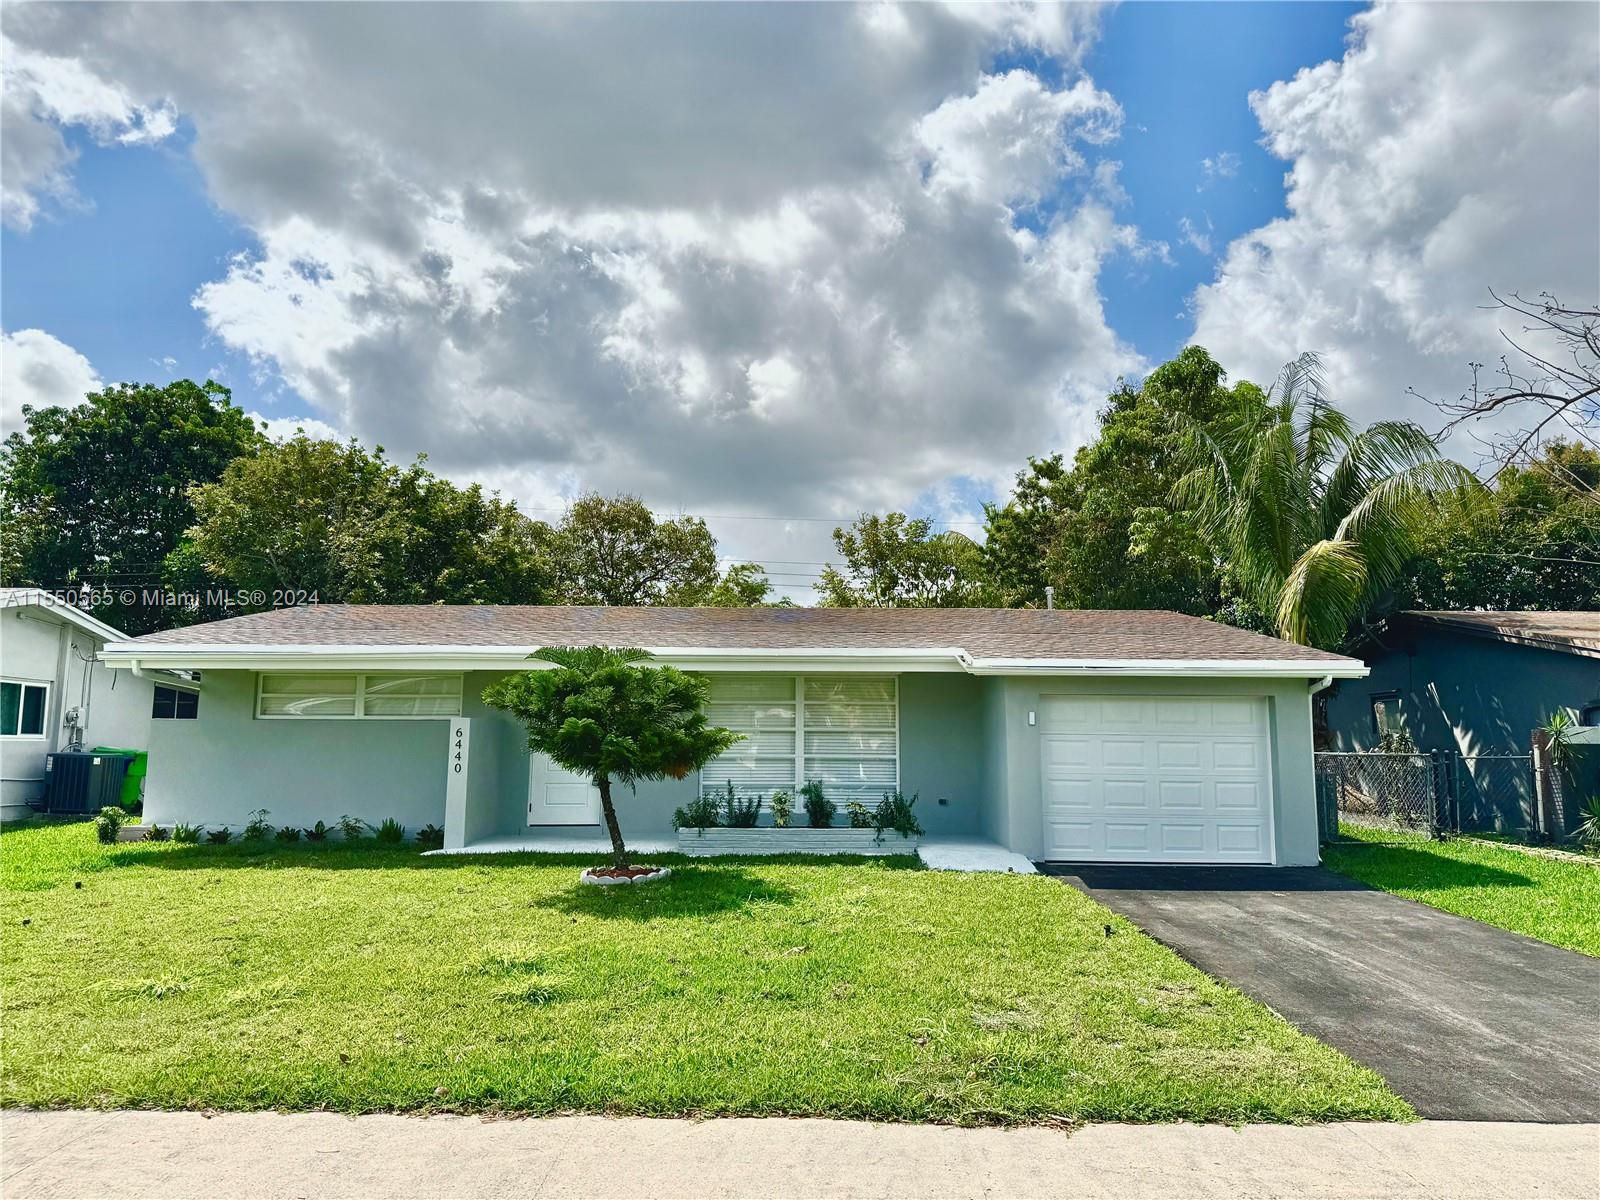 Photo of 6440 NW 30th St in Sunrise, FL